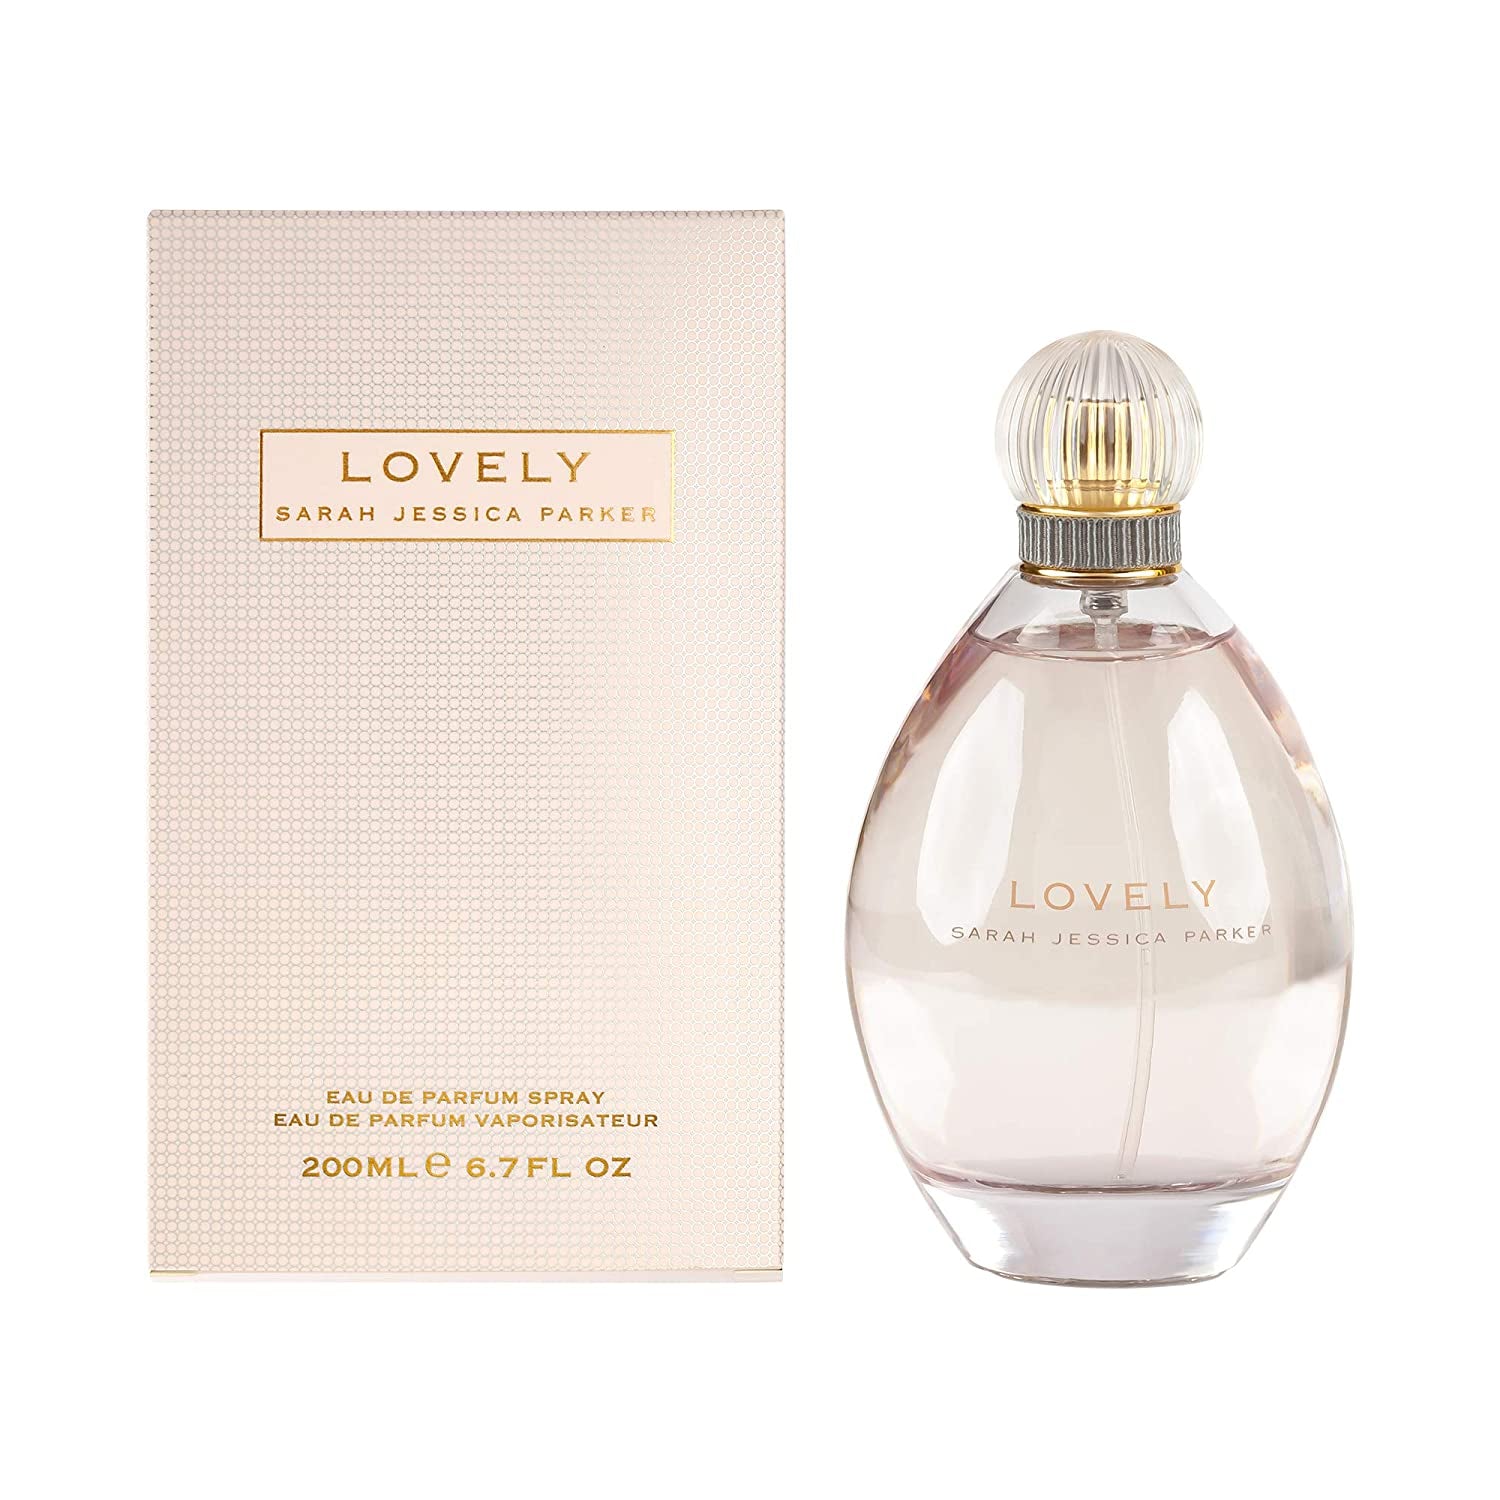 Lovely by SJP - Sweet, Floral, Musky Amber Woody Eau De Parfum Spray Fragrance for Women - With Notes of Mandarin, Bergamot, Apple, and Cedarwood - Intense, Long Lasting Scent - 6.7 oz